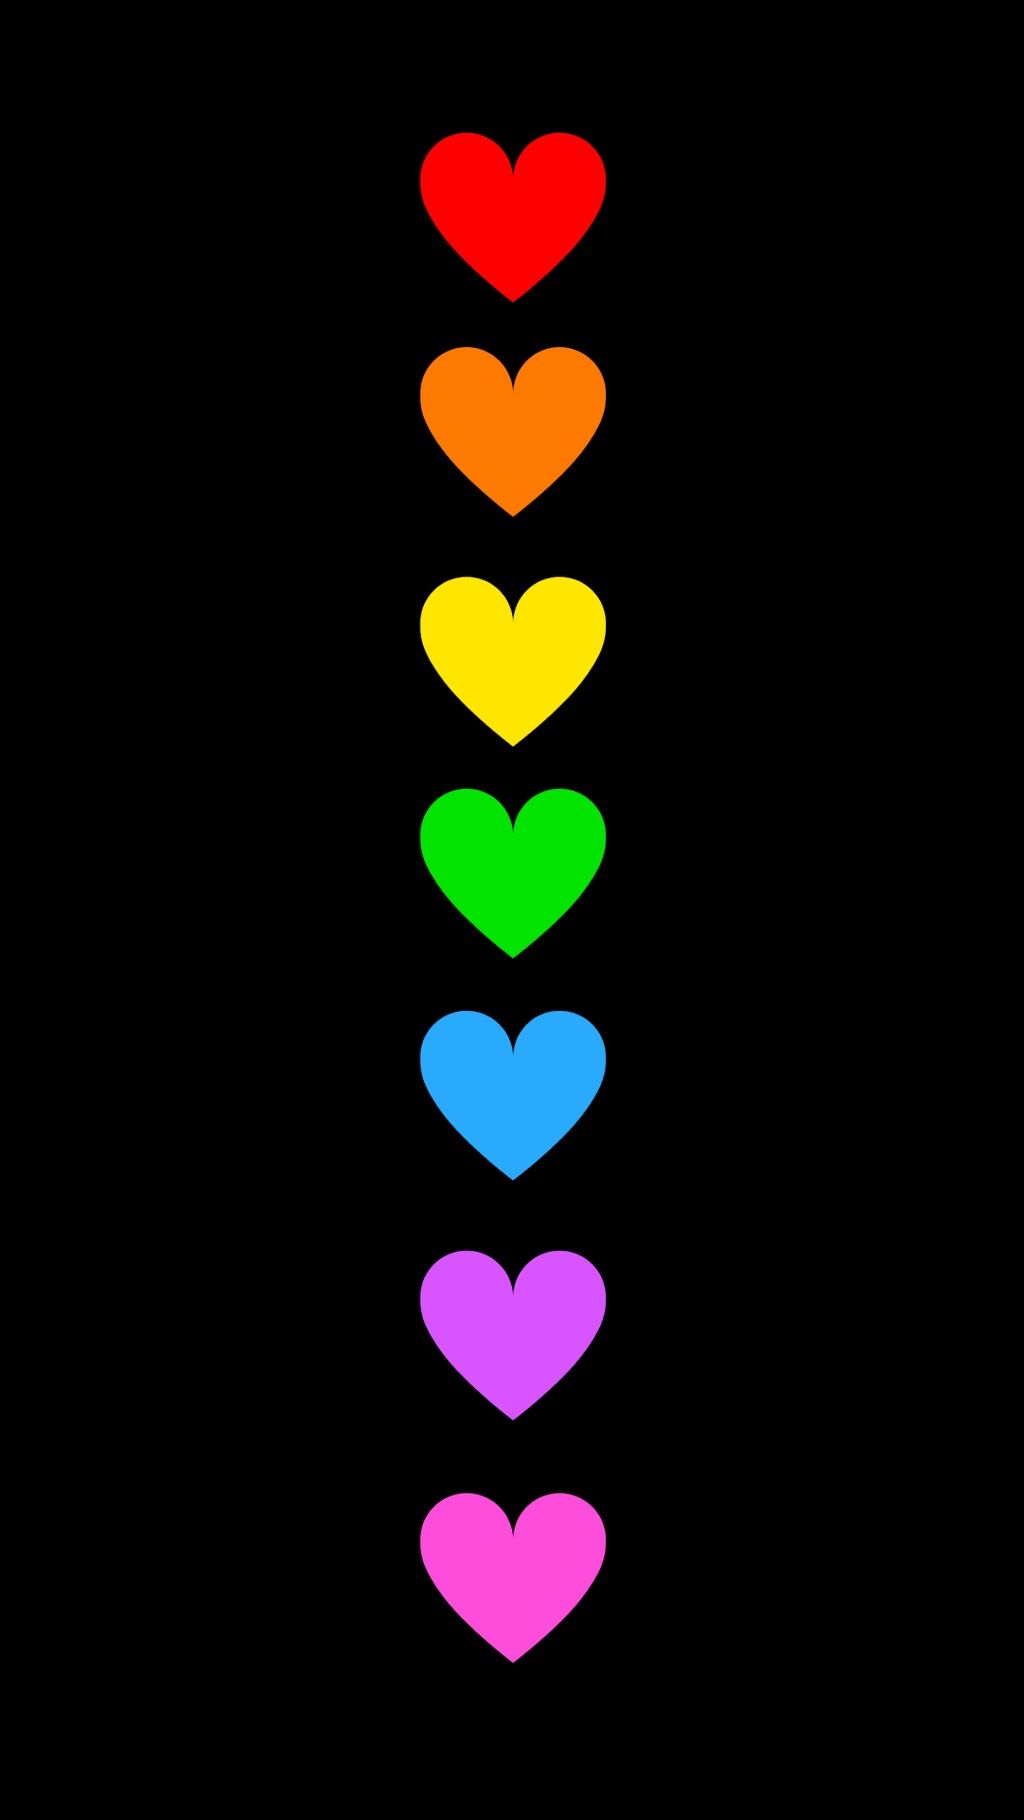 Bright Colors On Black Background Heart Wallpaper, - Heart , HD Wallpaper & Backgrounds